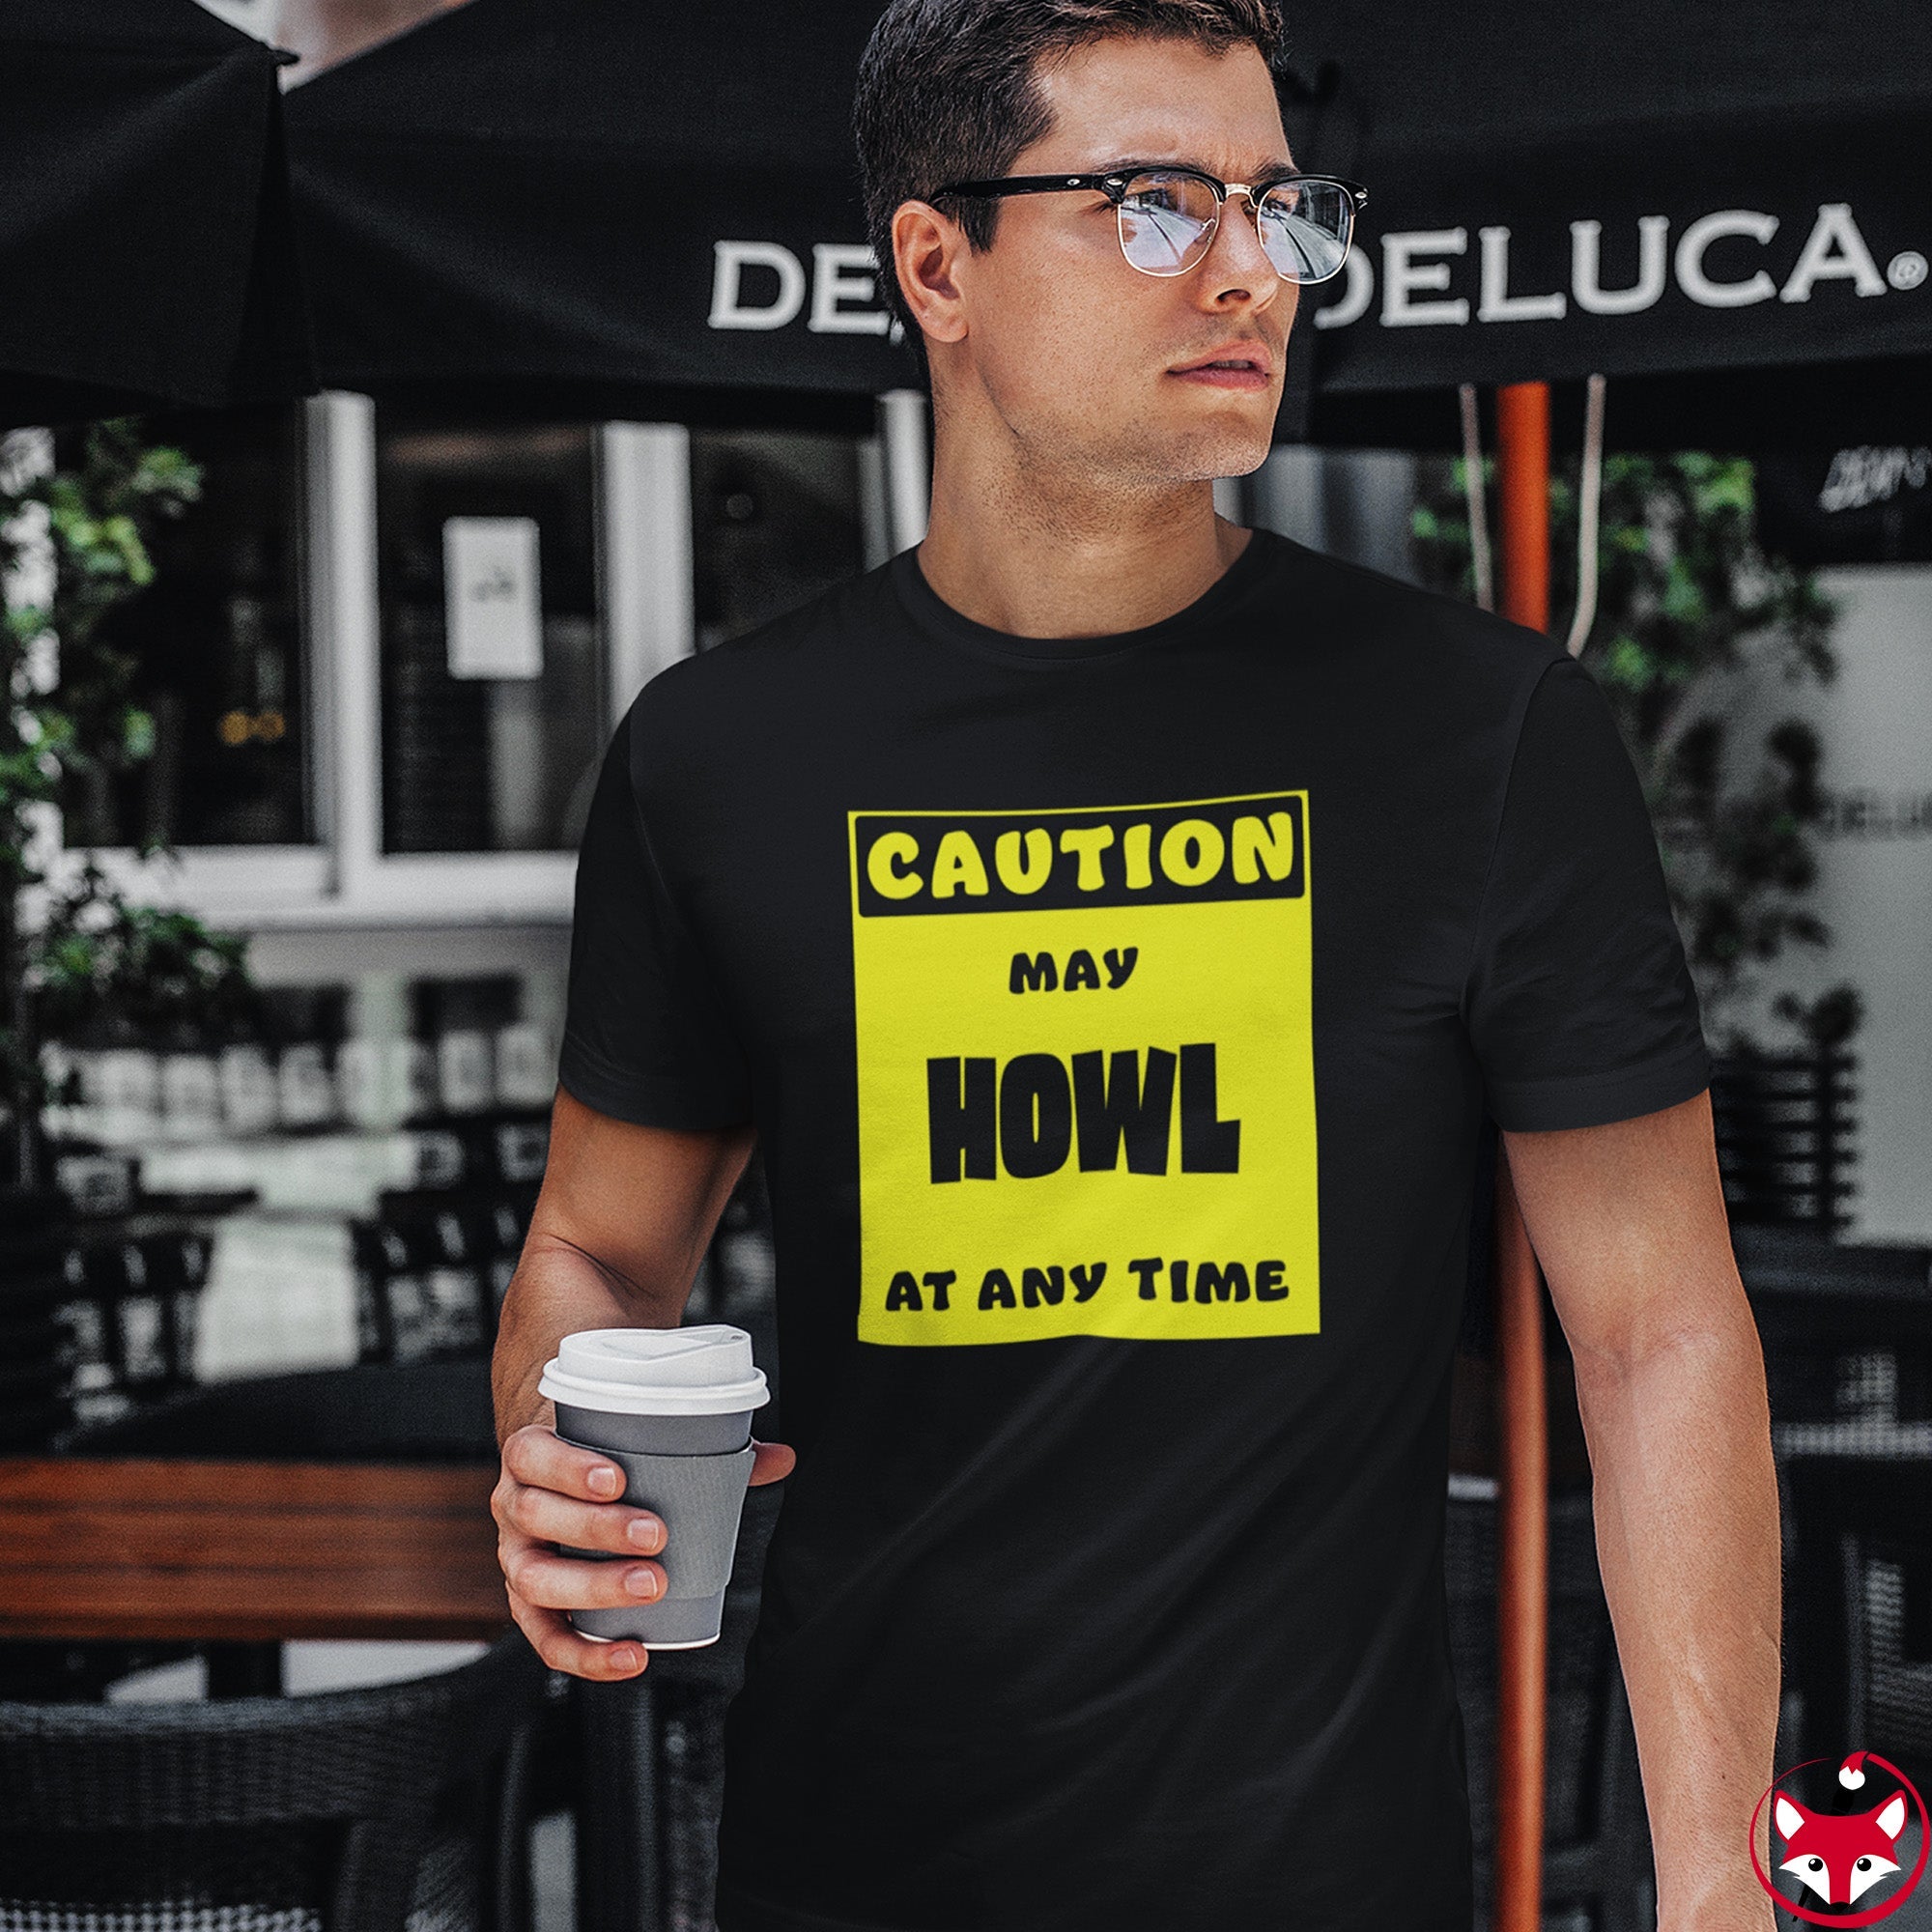 CAUTION! May HOWL at any time! - T-Shirt T-Shirt AFLT-Whootorca 